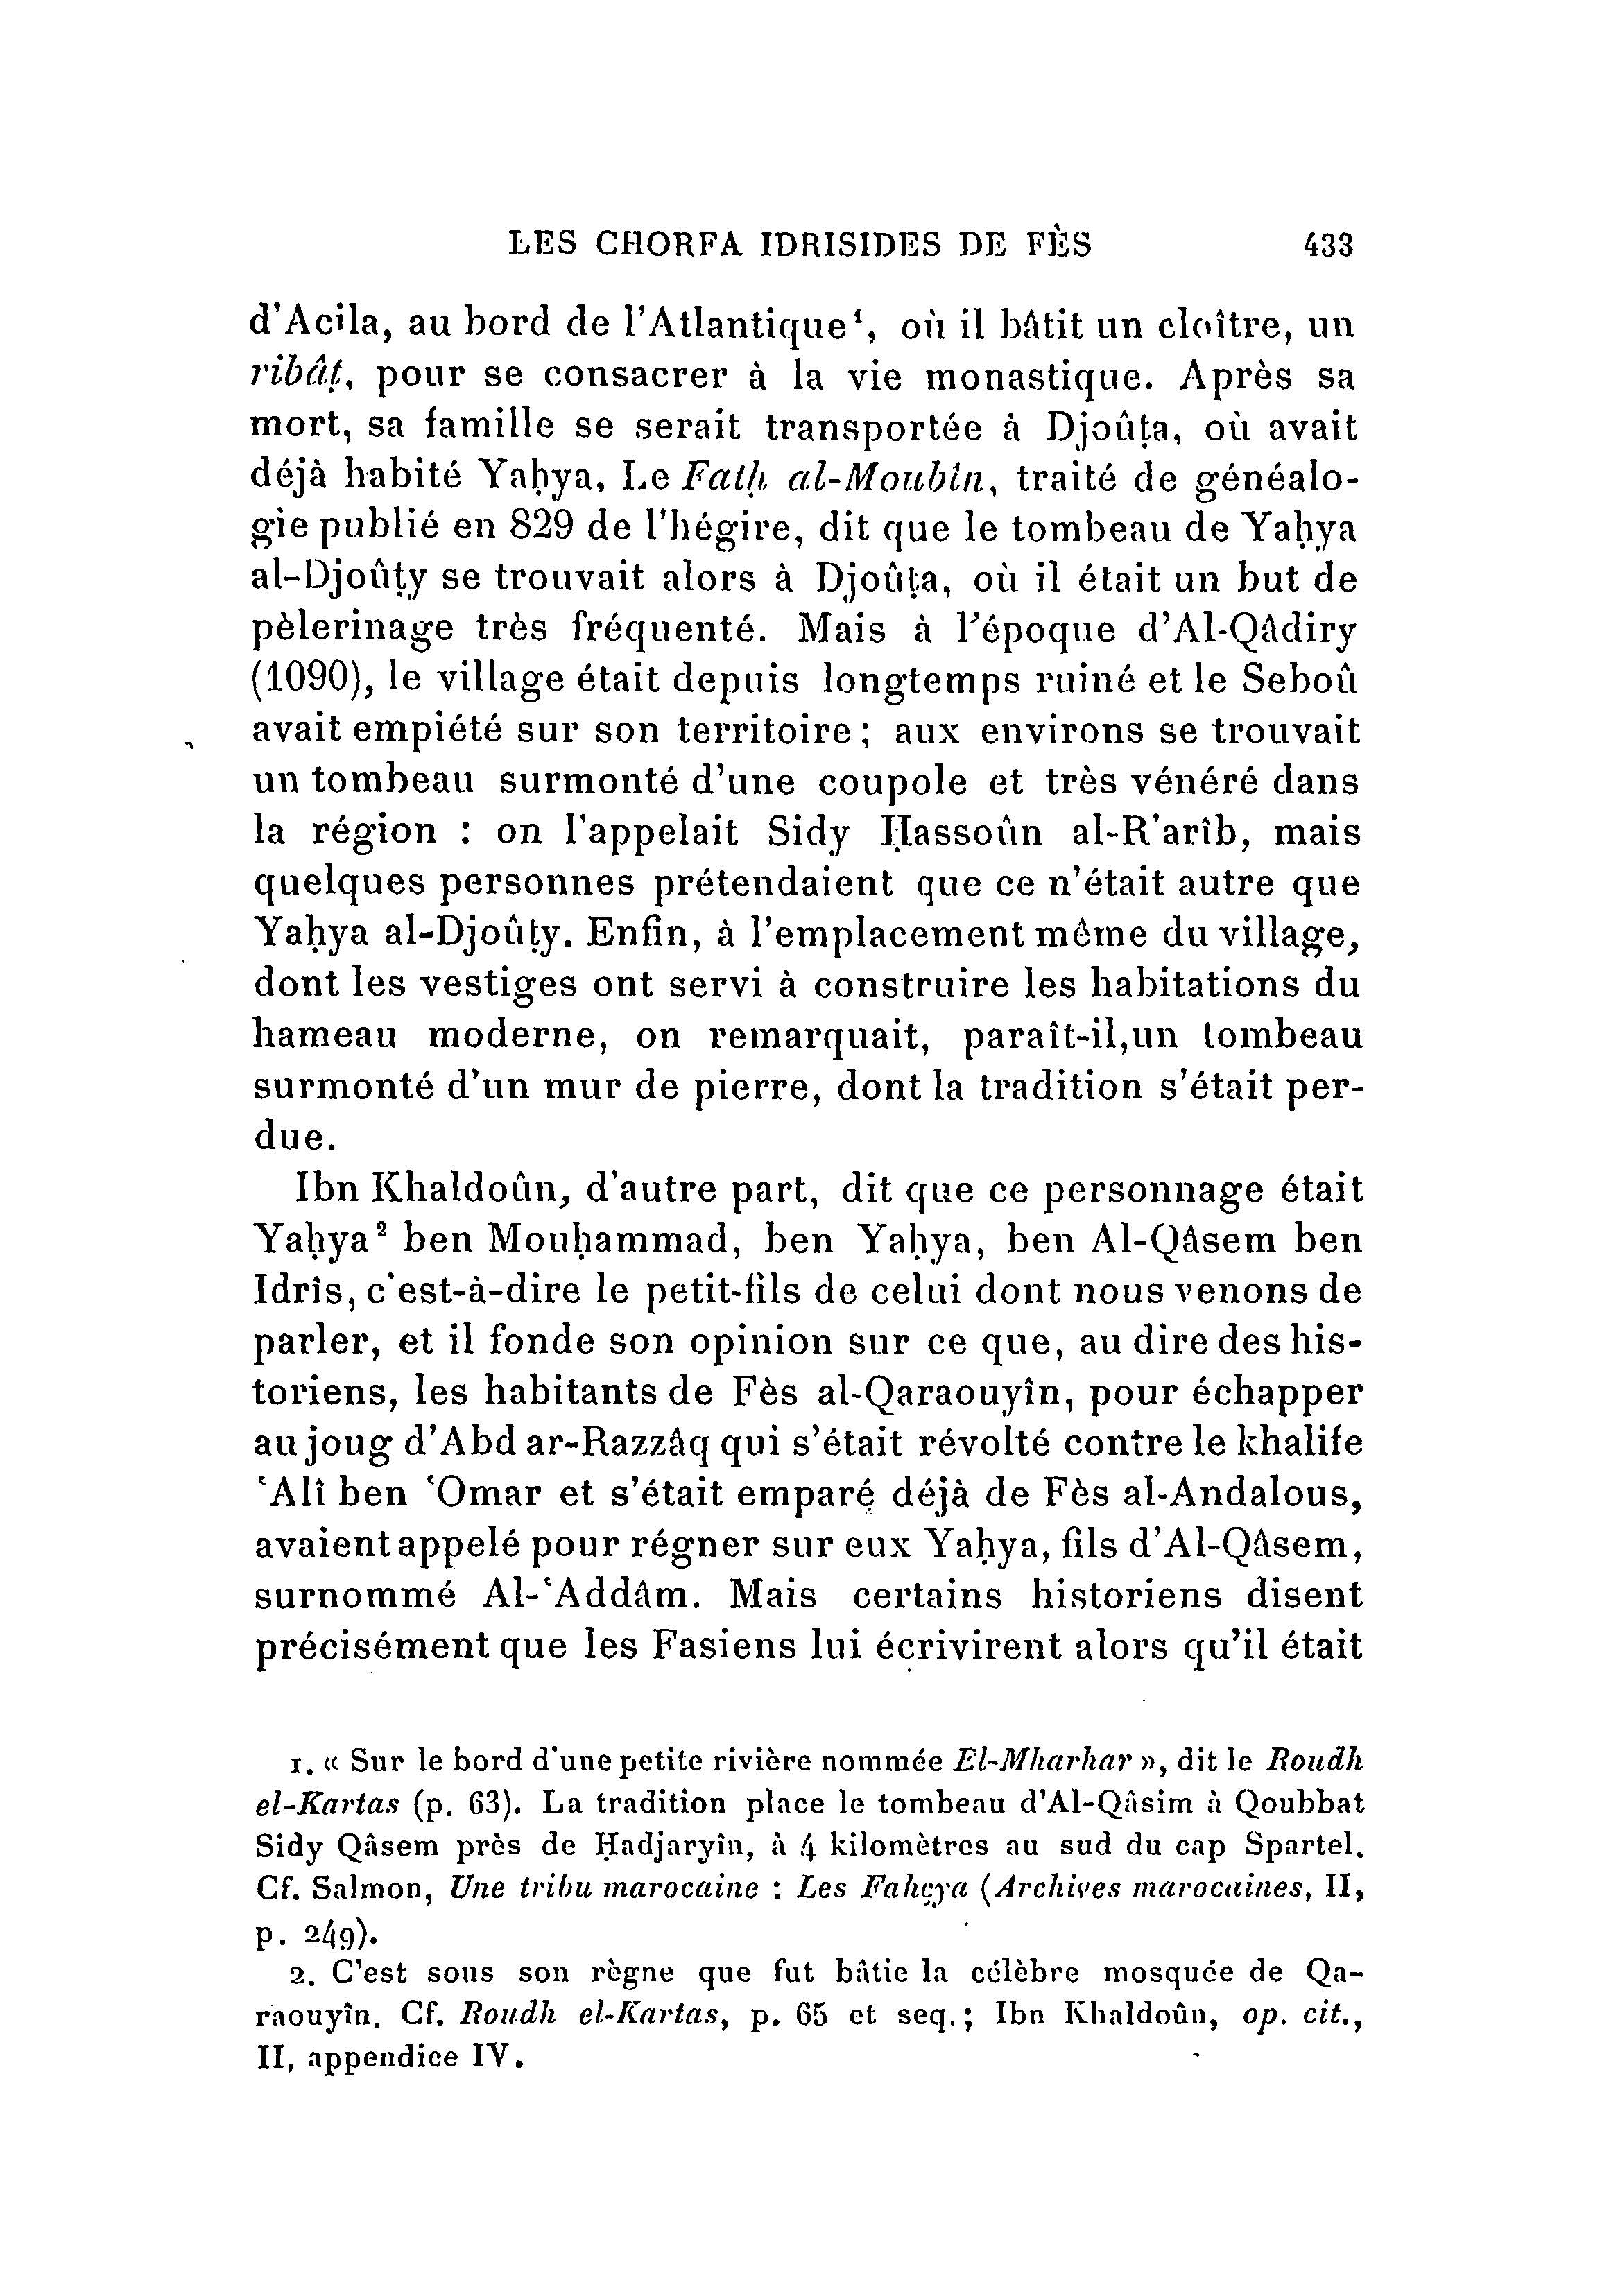 archives_marocaines-vol-1_page_445